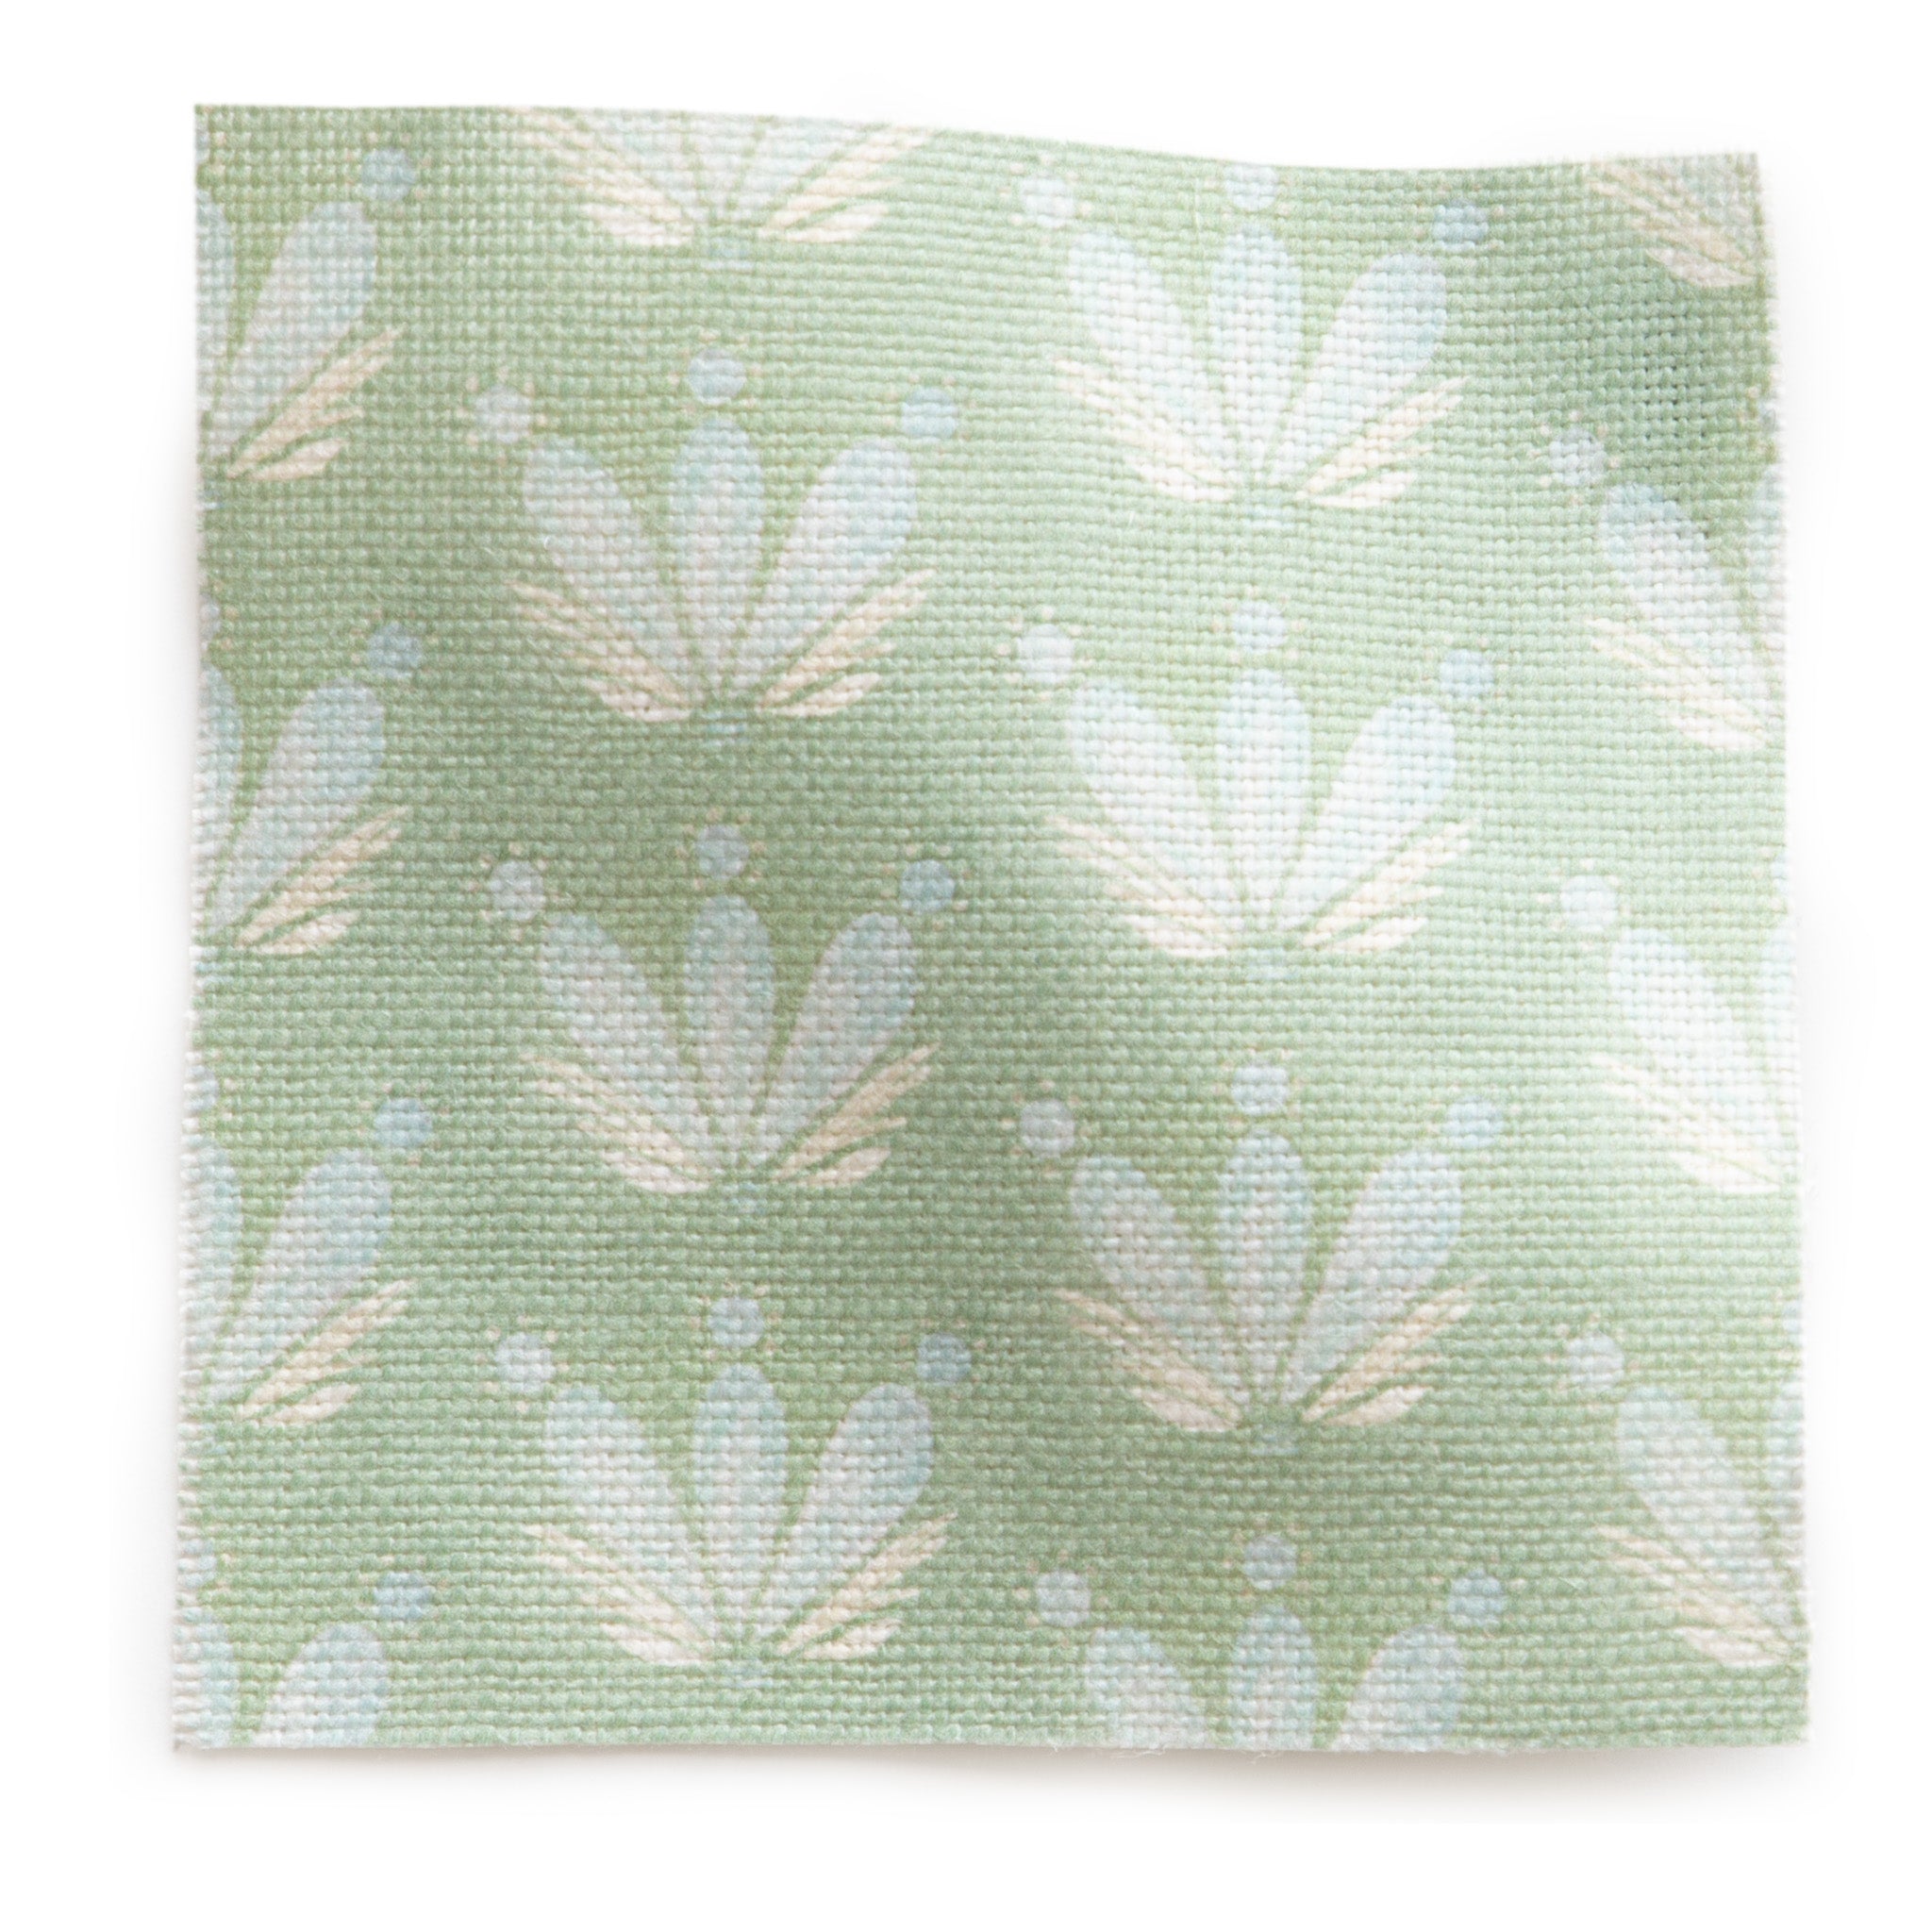 Blue and green gloral drop repeat heavyweight linen fabric swatch